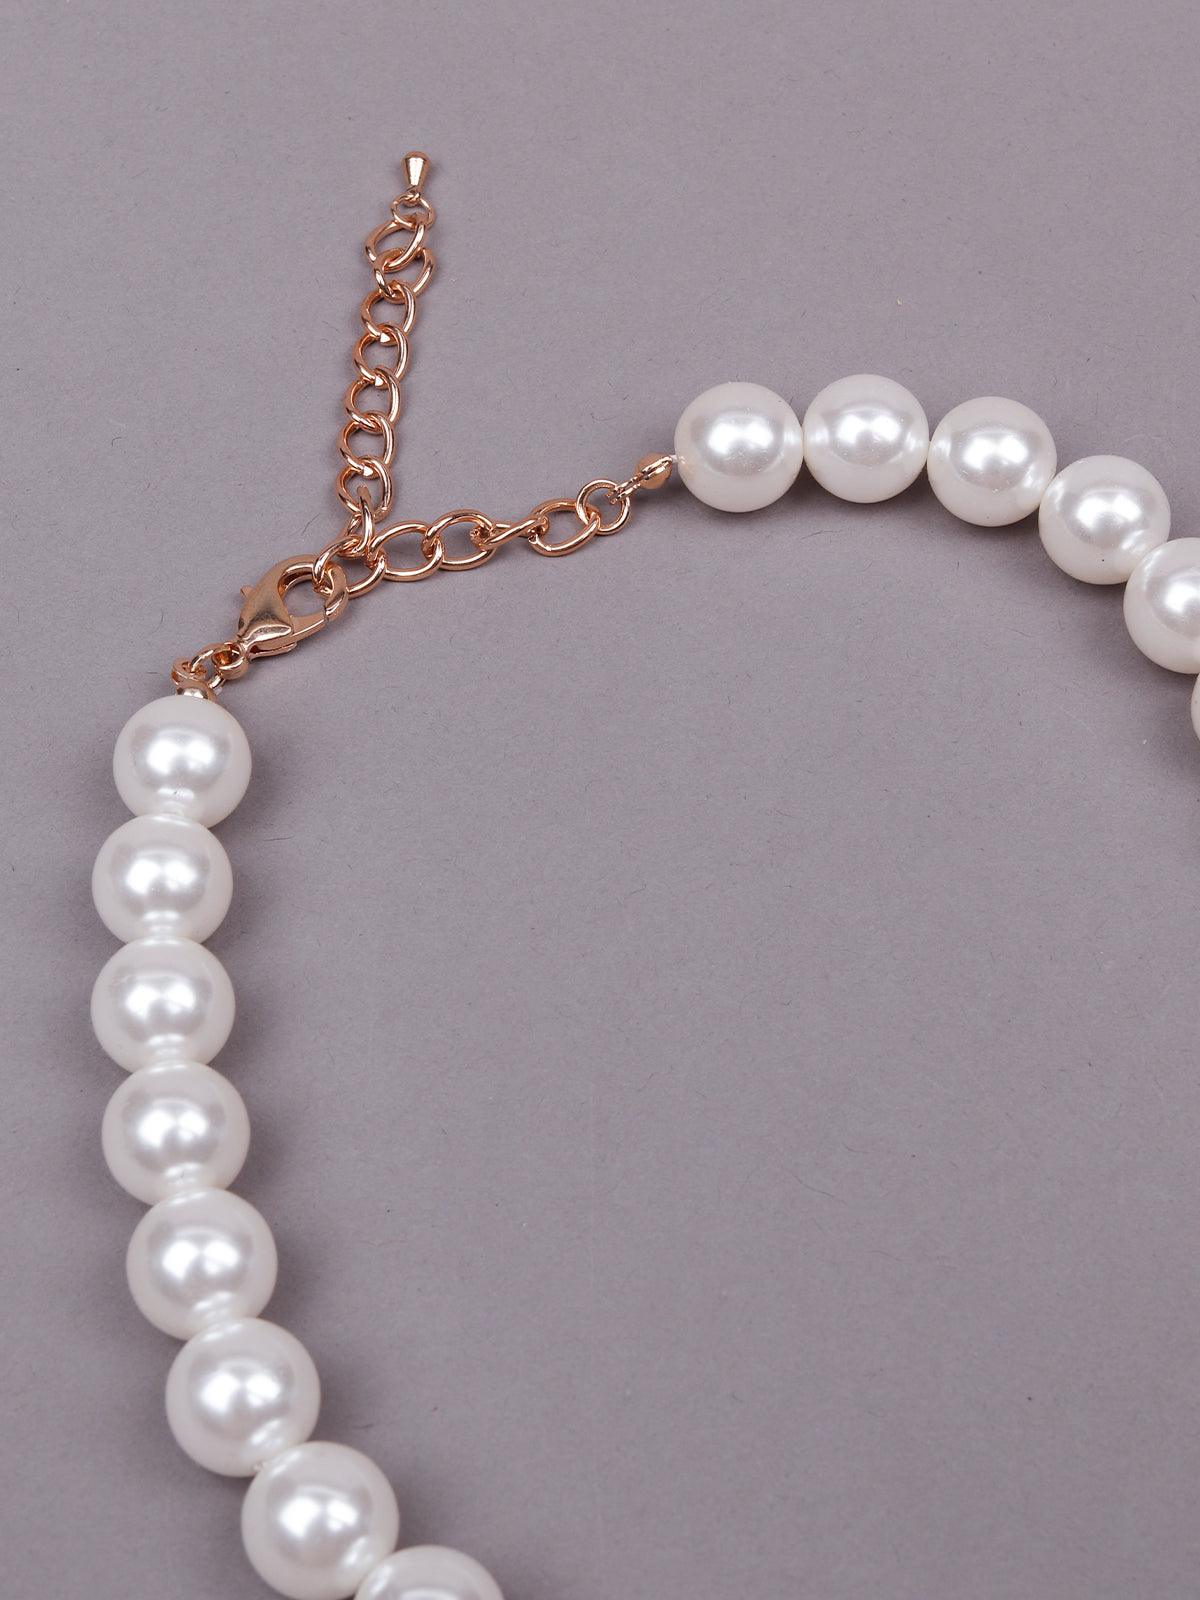 Women's Exquisite Artificial Pearl And Crystal Pendant Necklace - Odette